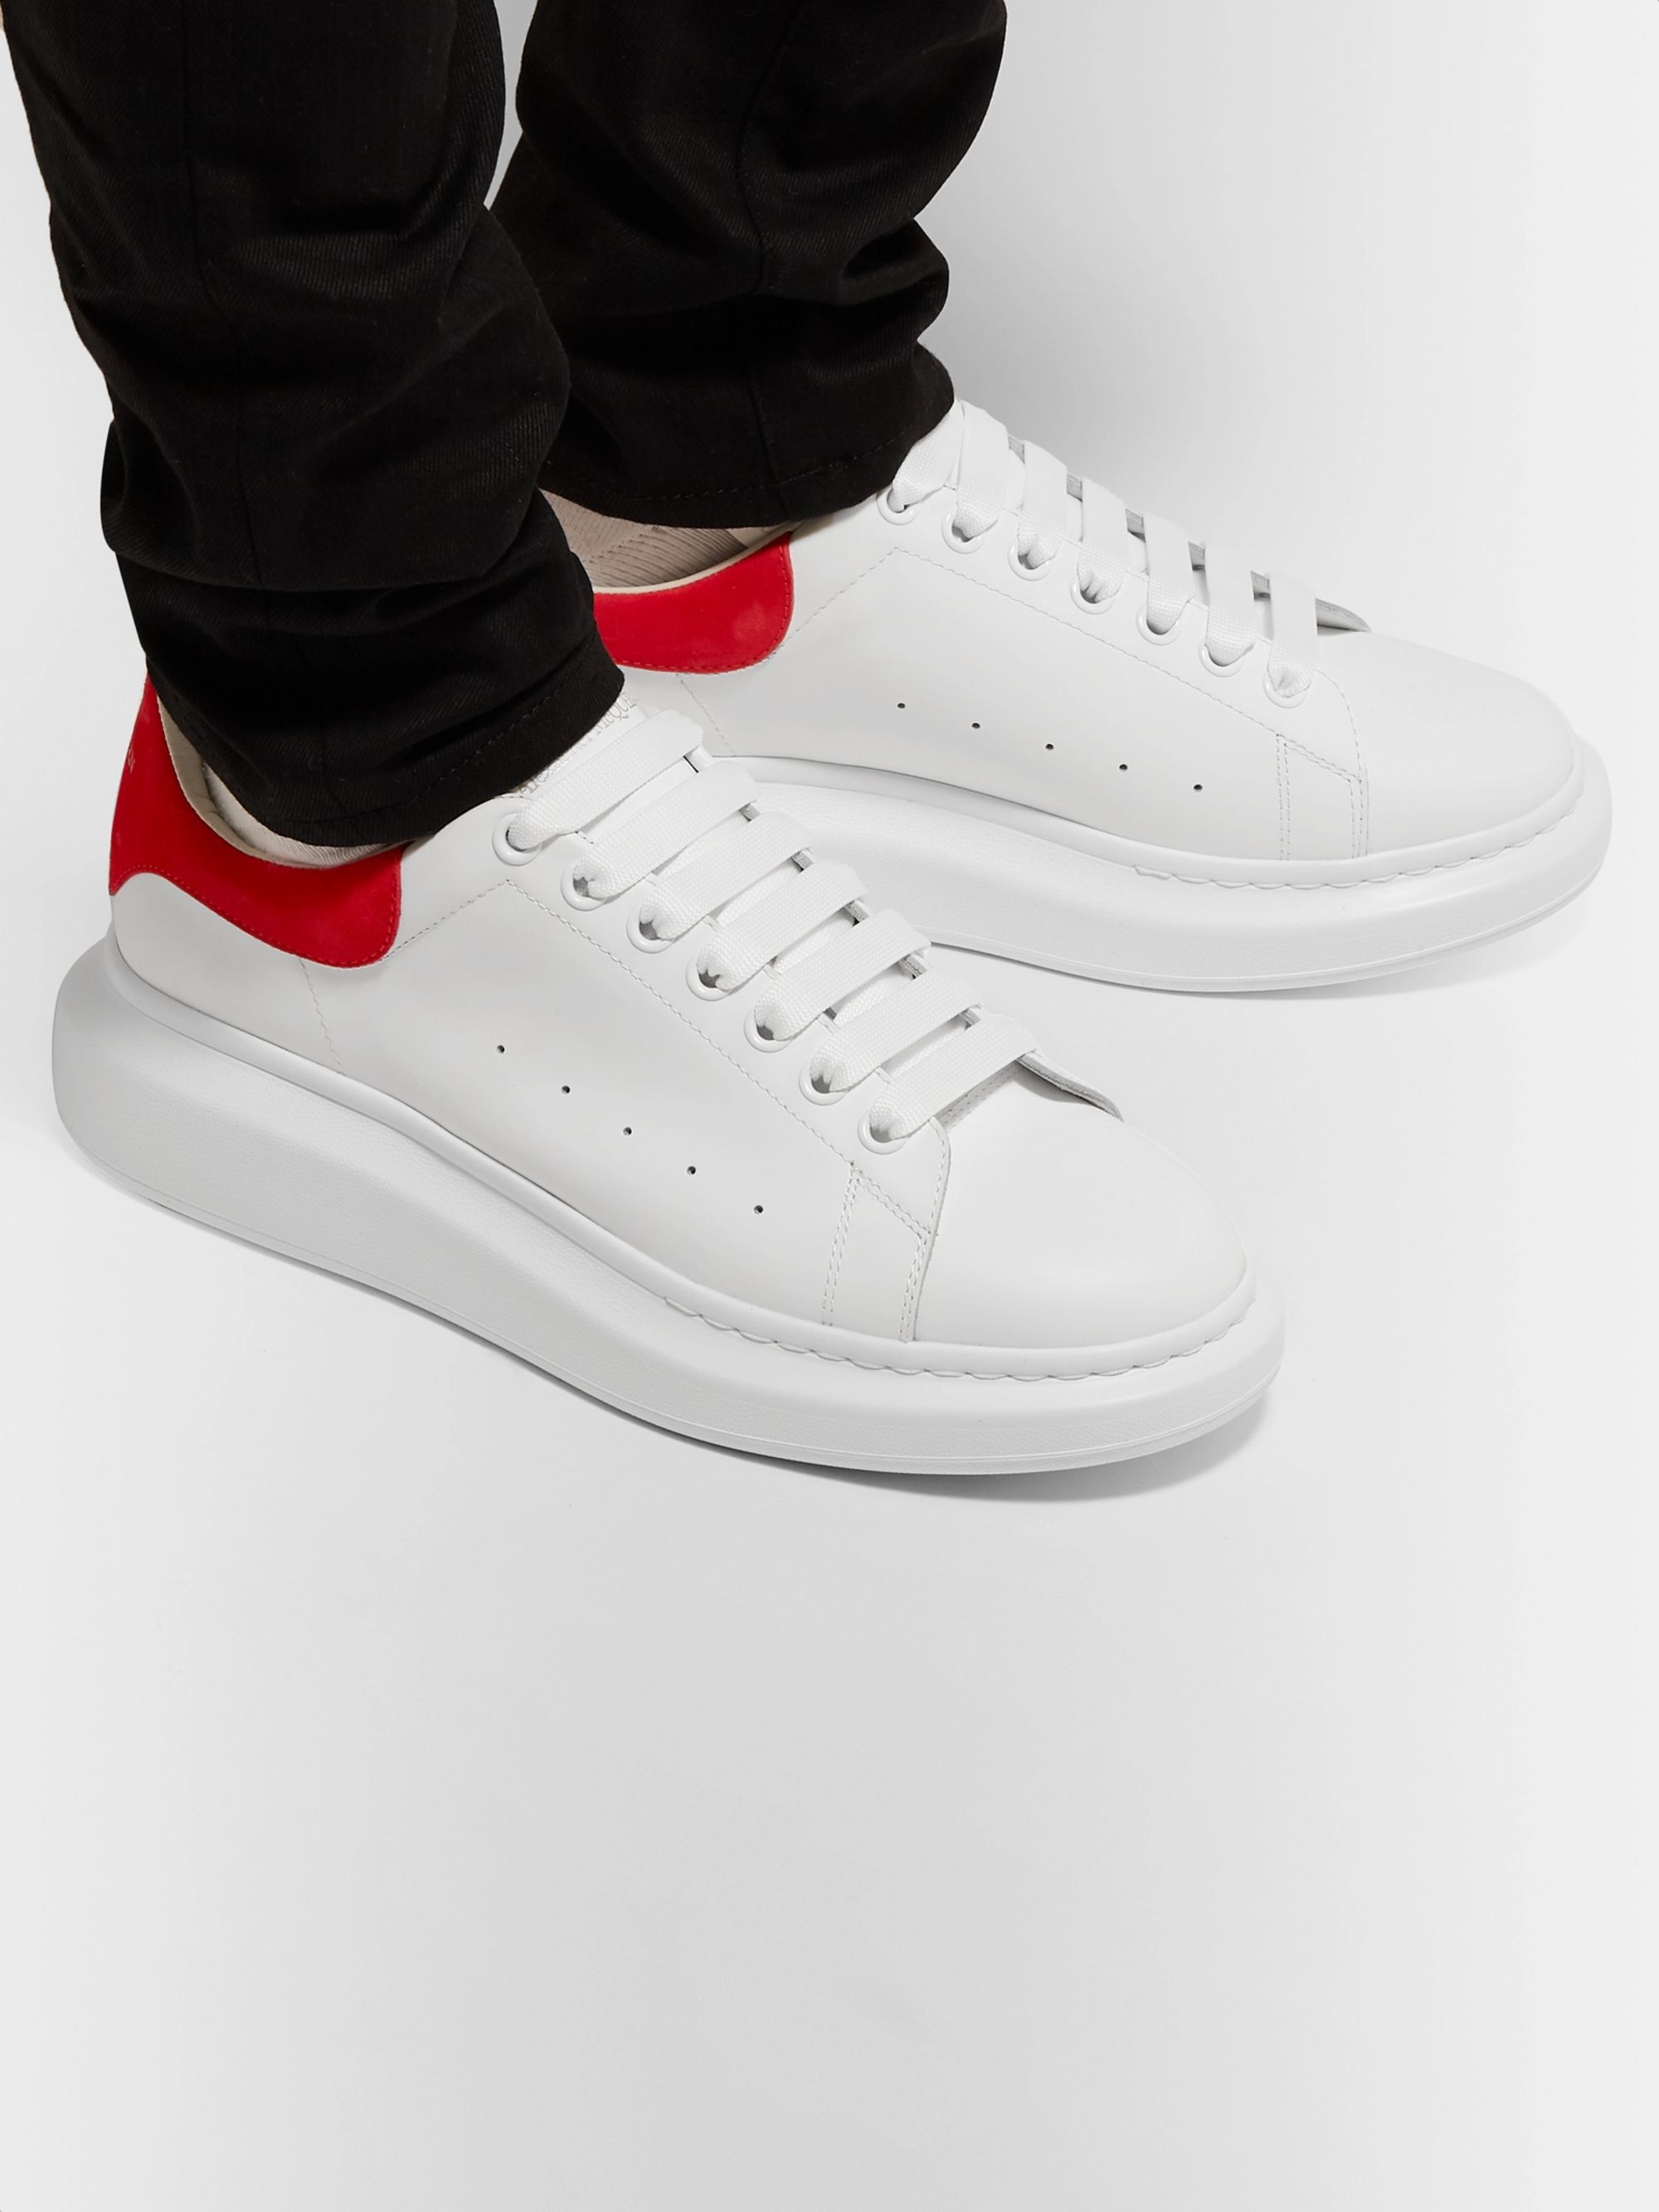 white and red alexander mcqueen shoes